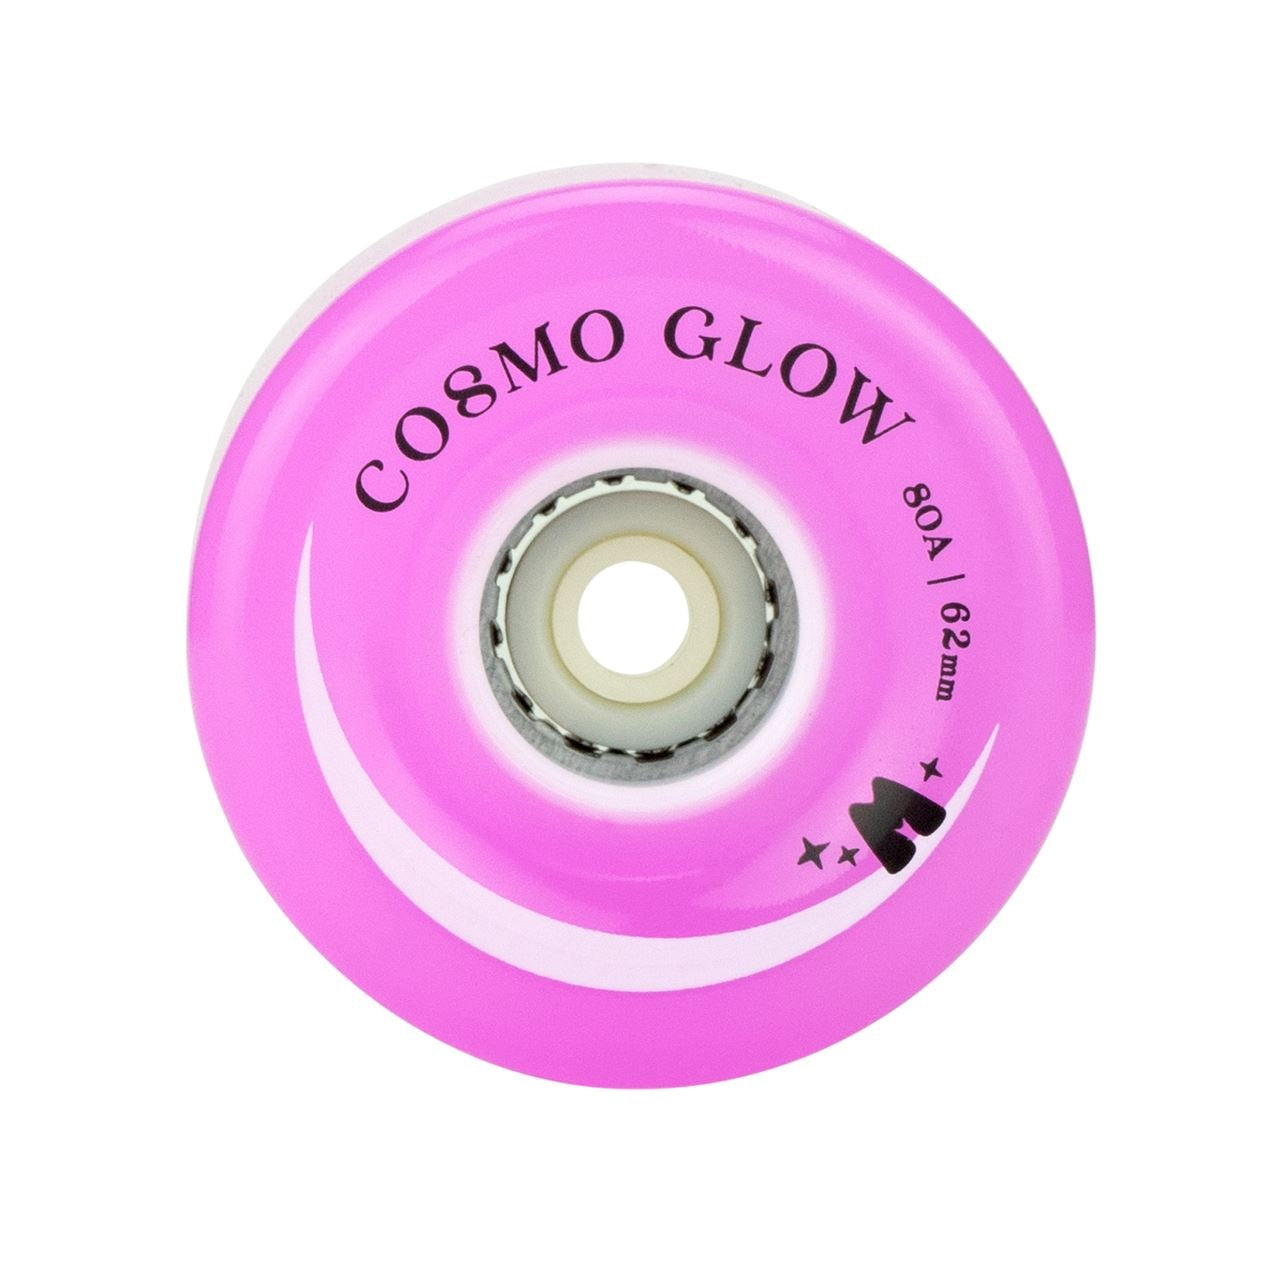 Moxi Cosmo Glow LED Light Up Roller Skate Wheels Purple Haze 62mm 80a - 4 Pack